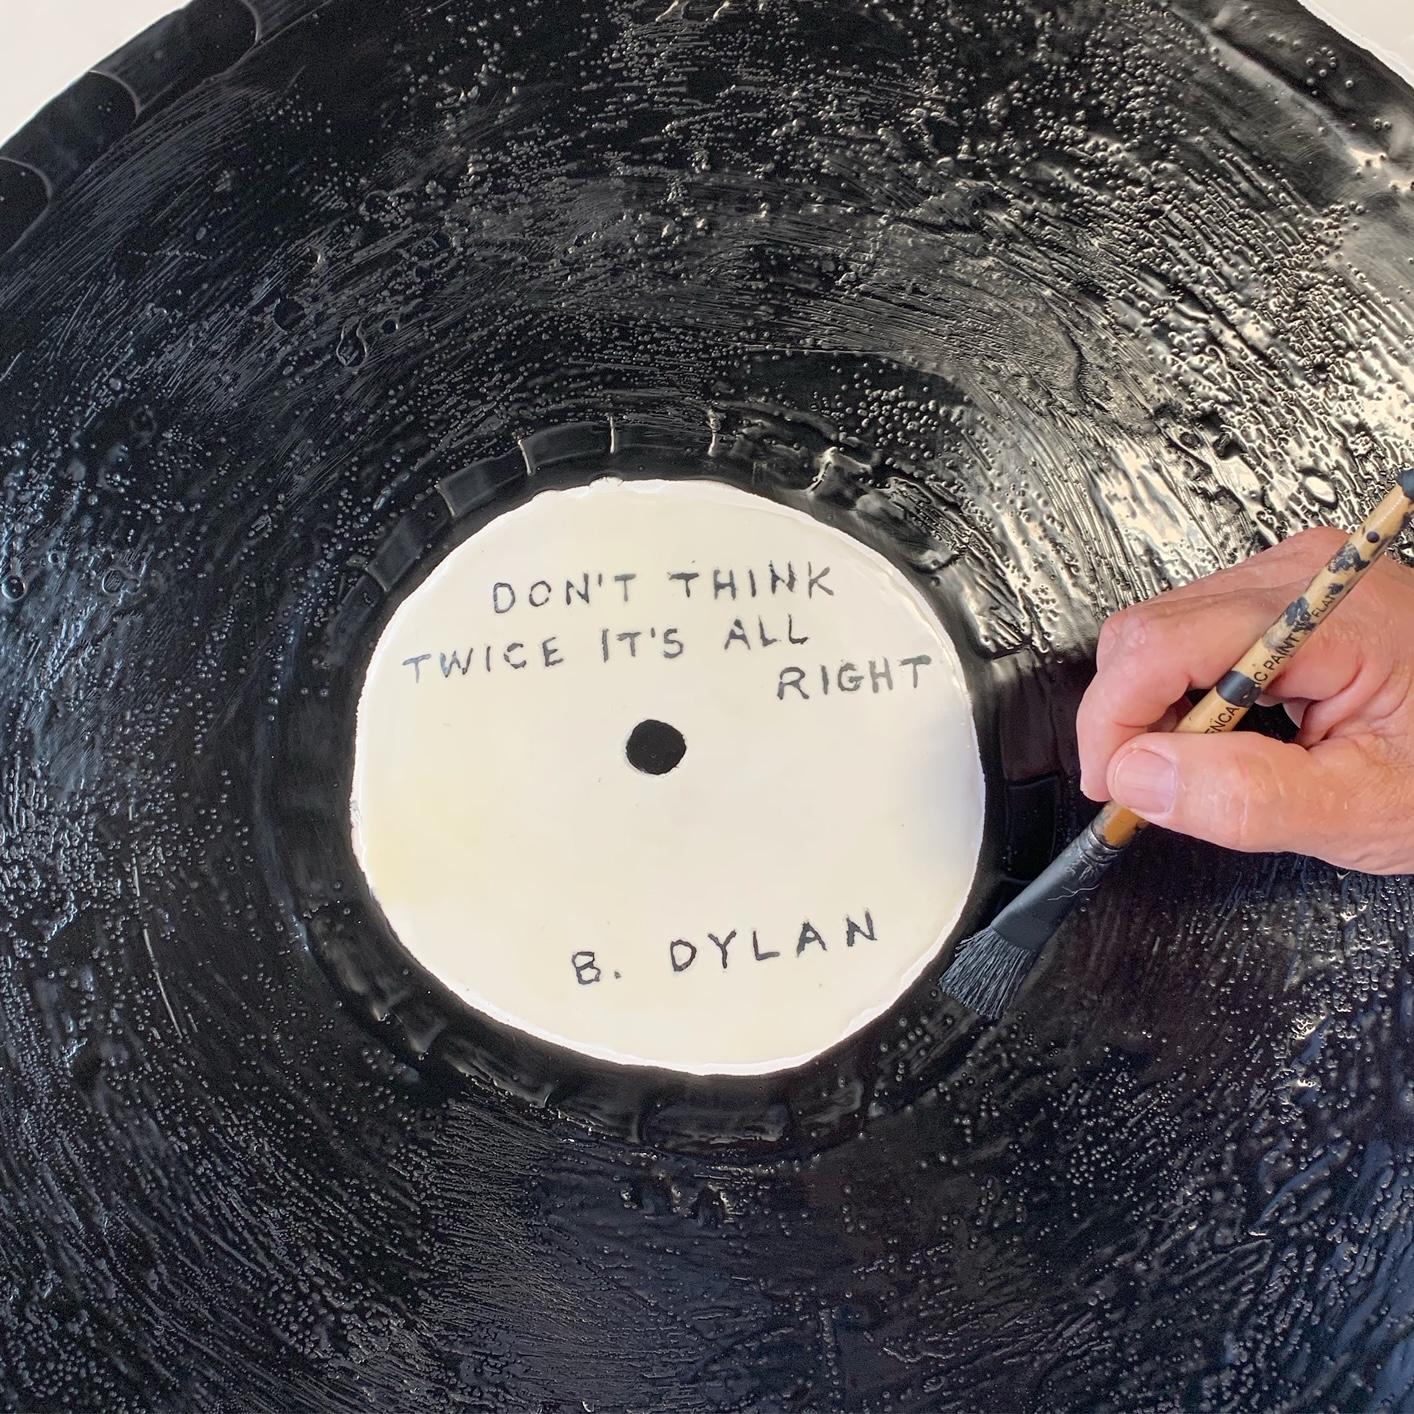 Introducing custom vinyl paintings. Commission your favorite song by artist John O'Hara. The Forsyth Art team will message you after purchase to discover the song you want for your home. Perfect for special gifts, anniversaries, birthdays, and